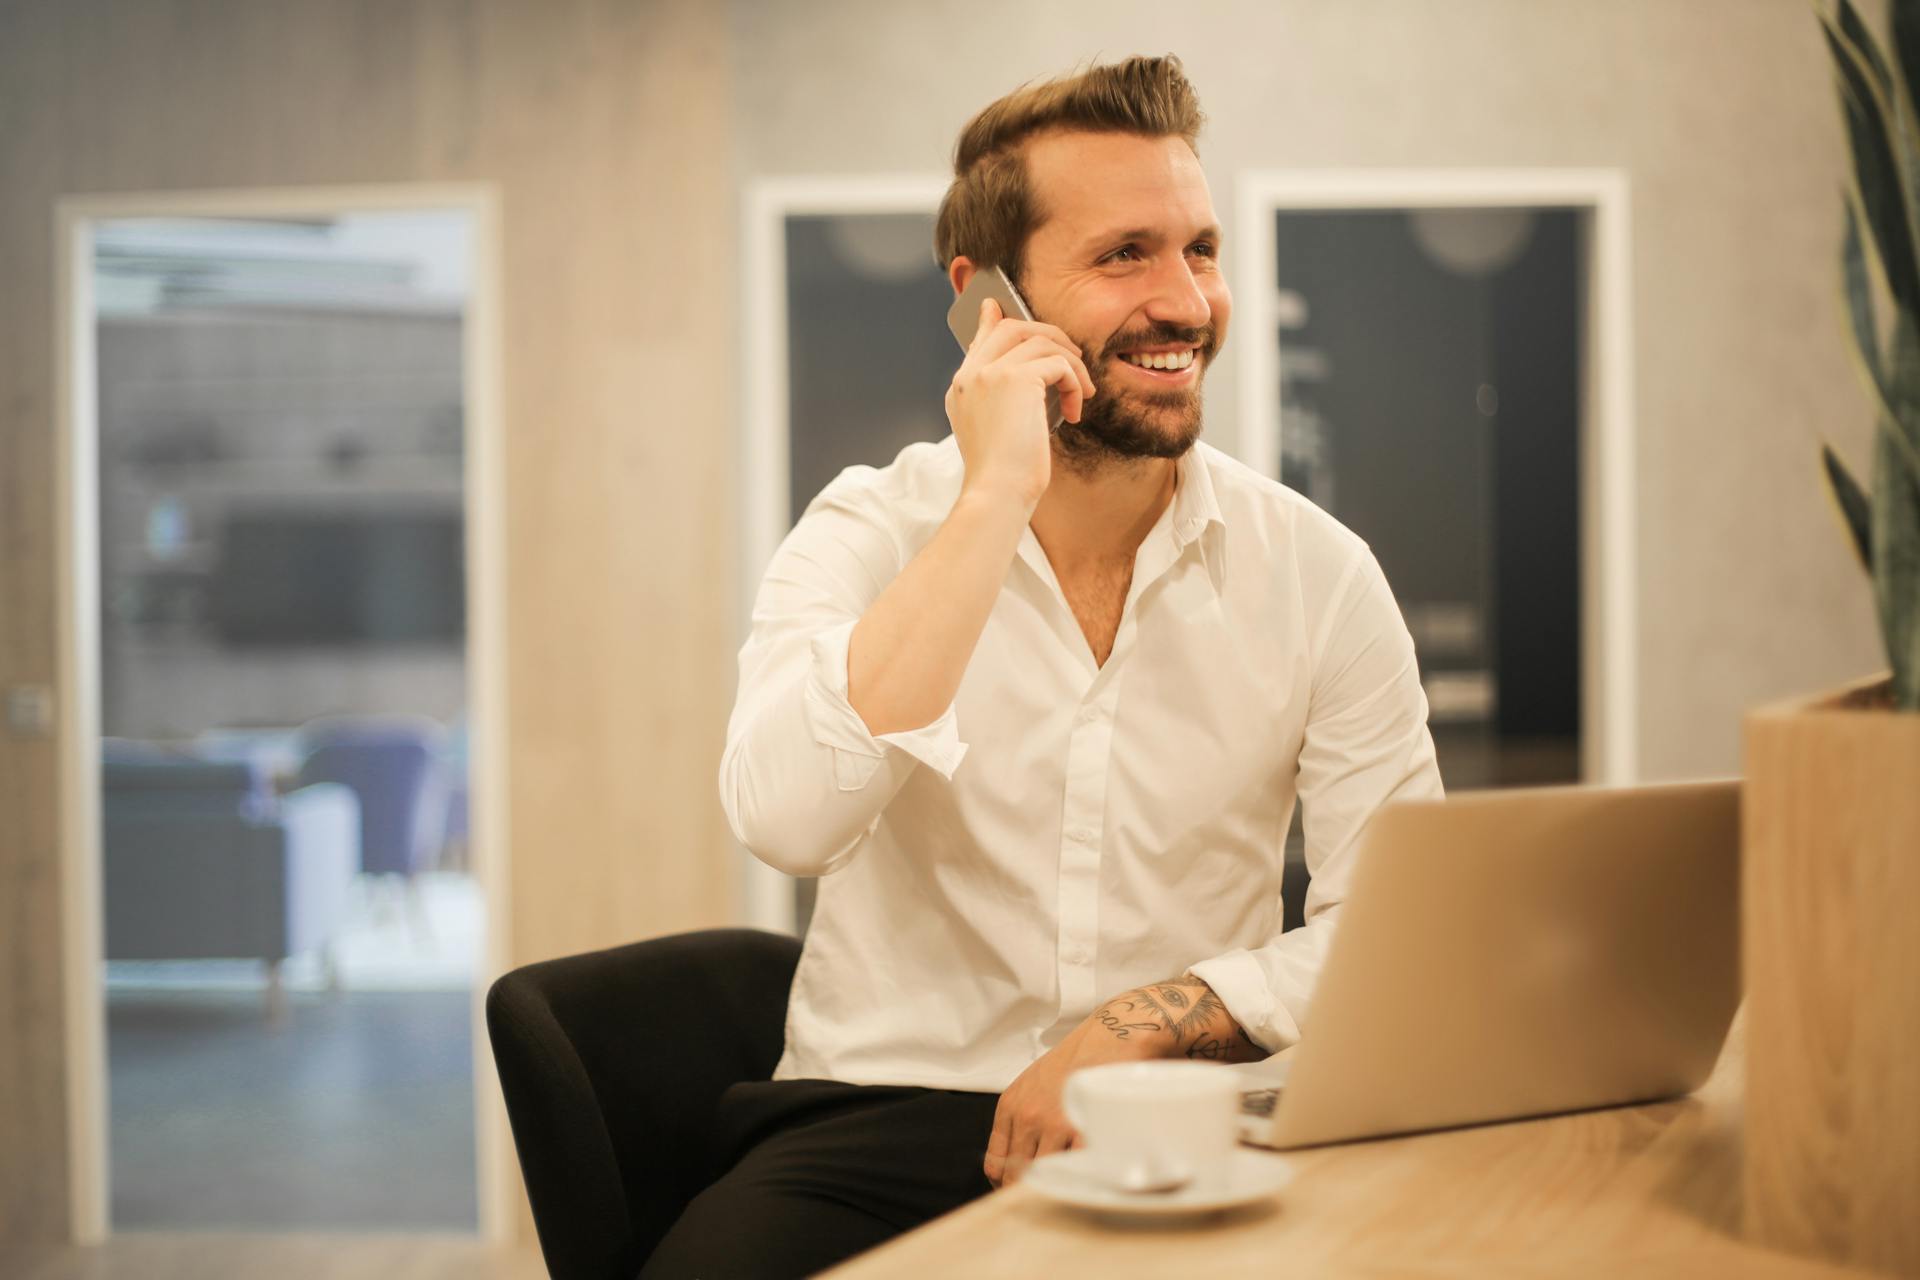 A man talking on the phone and smiling | Source: Pexels